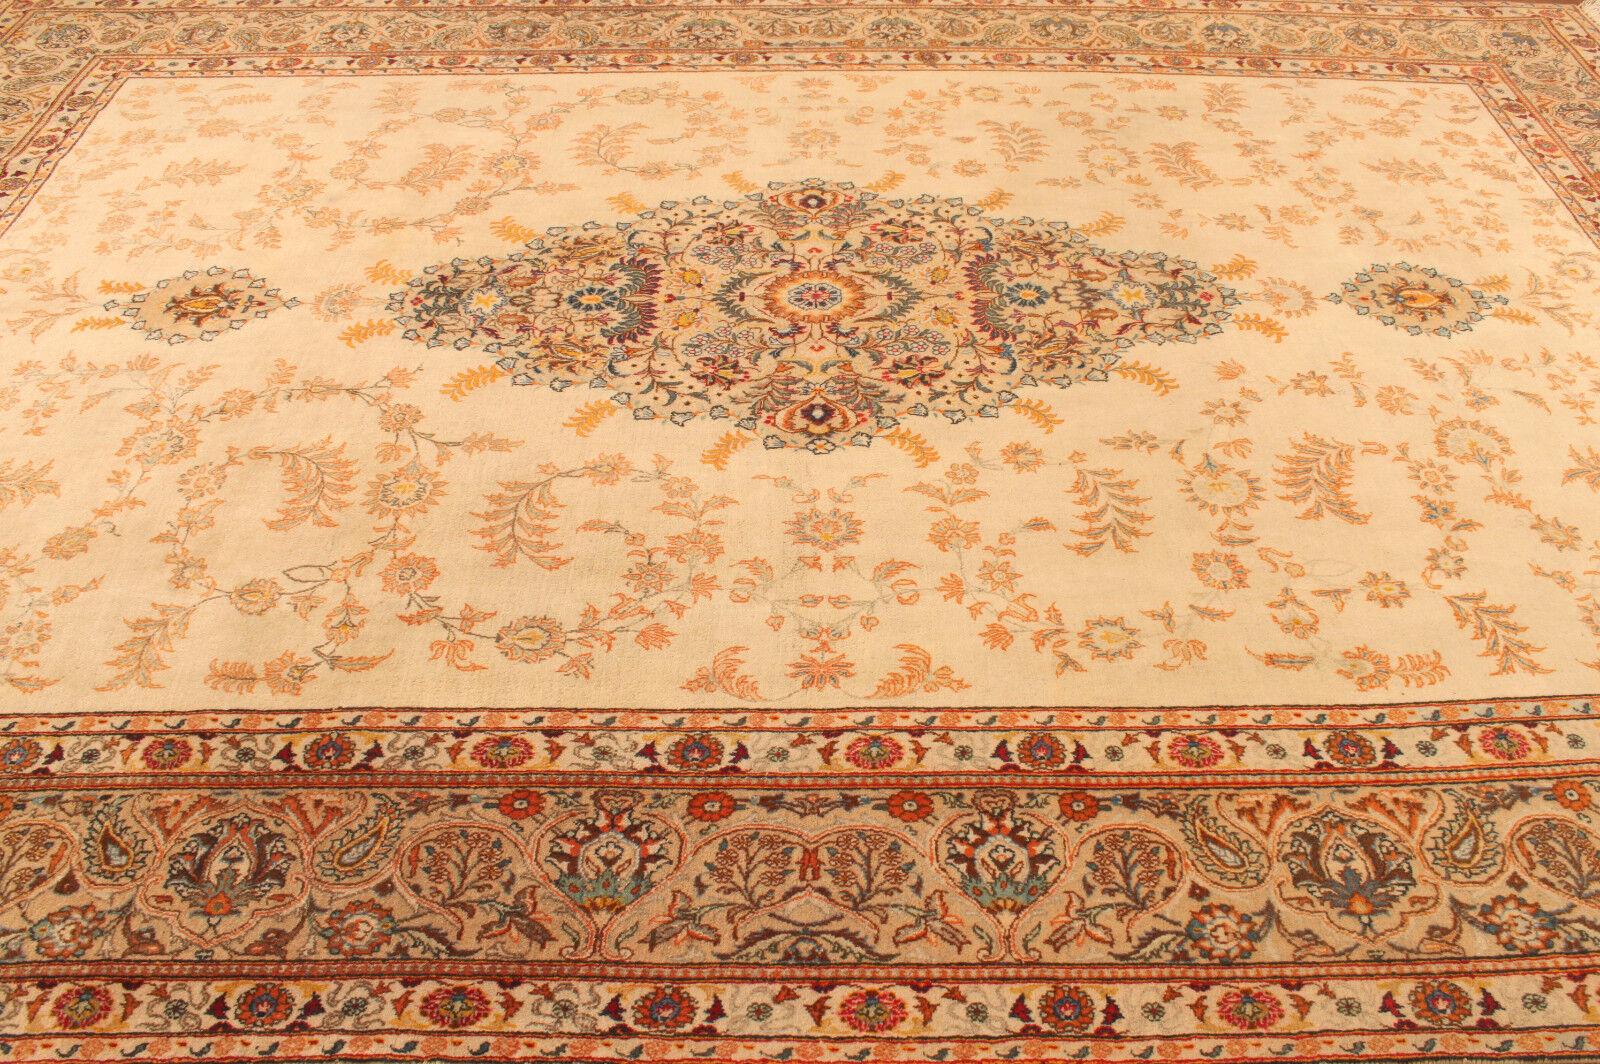 Wool Handmade Contemporary Persian Style Tabriz Rug 8.9' x 12.8', 2000s - 1T05 For Sale